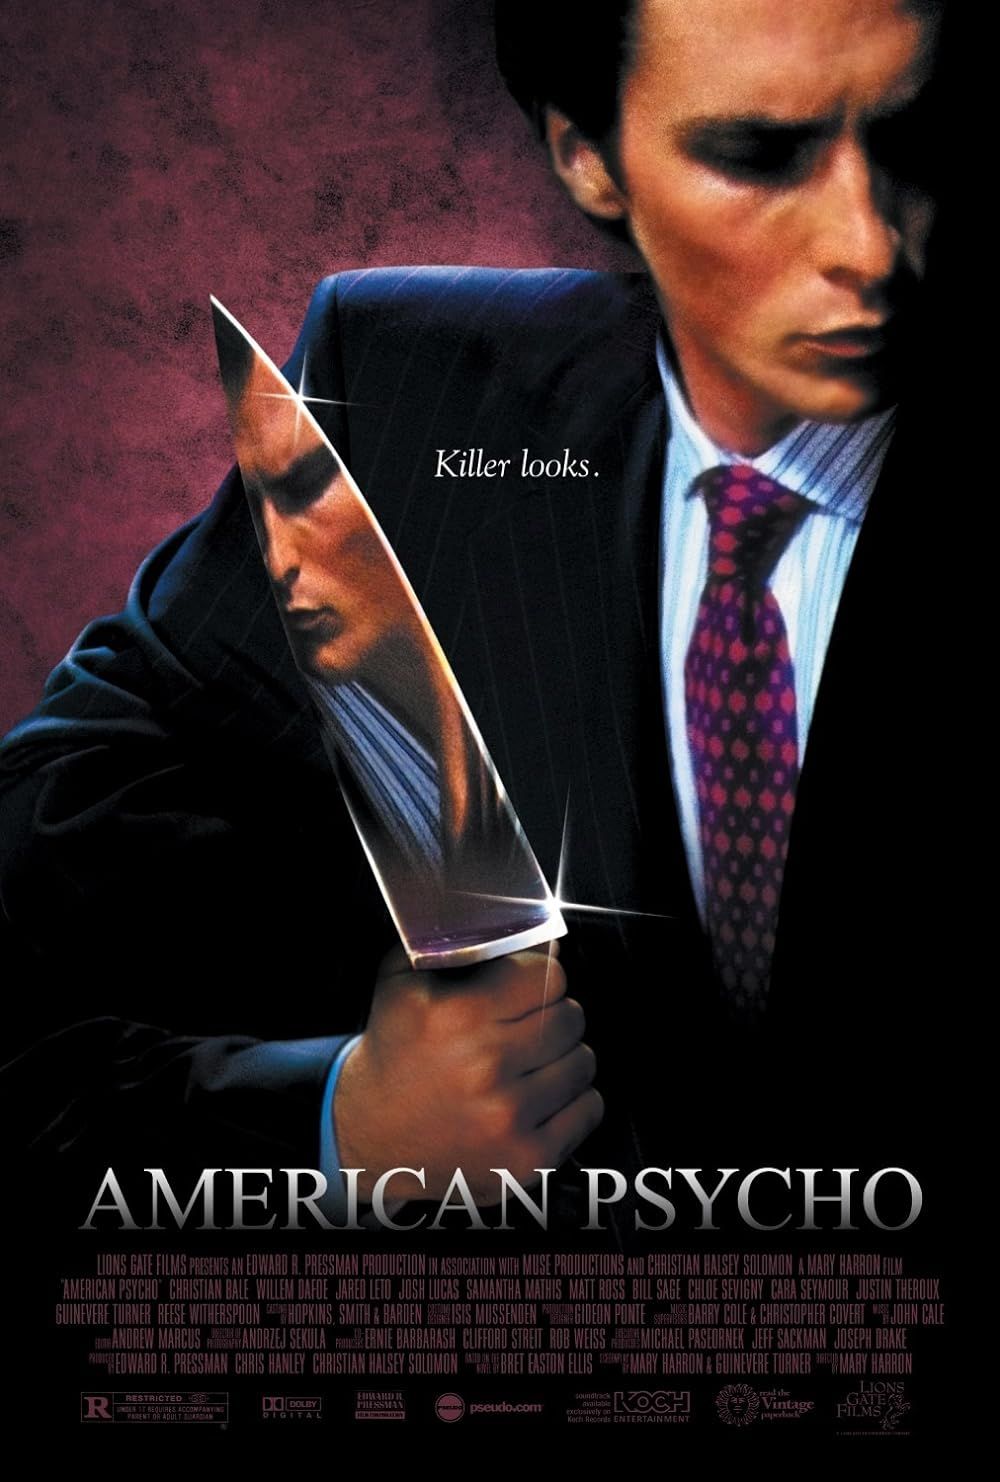 Christian Bale as Patrick Bateman holding a knife with a reflection on American Psycho movie poster